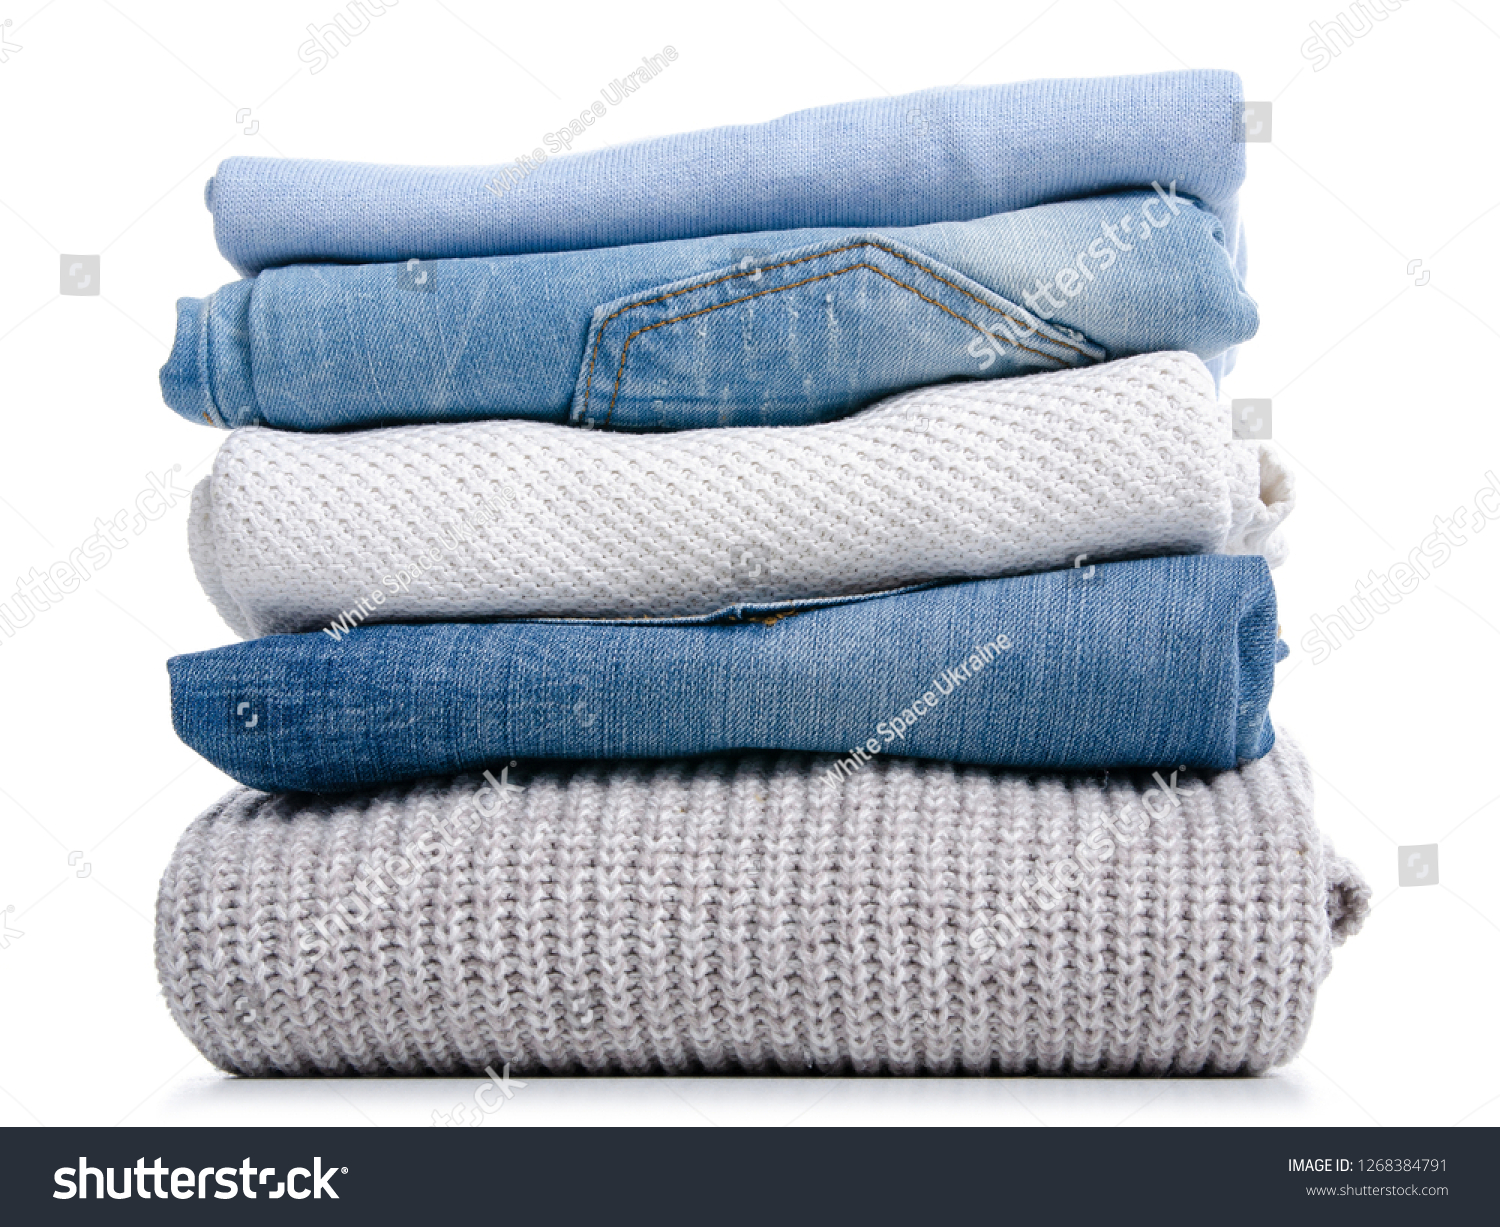 Stack of clothing jeans sweaters on a white background isolation #1268384791